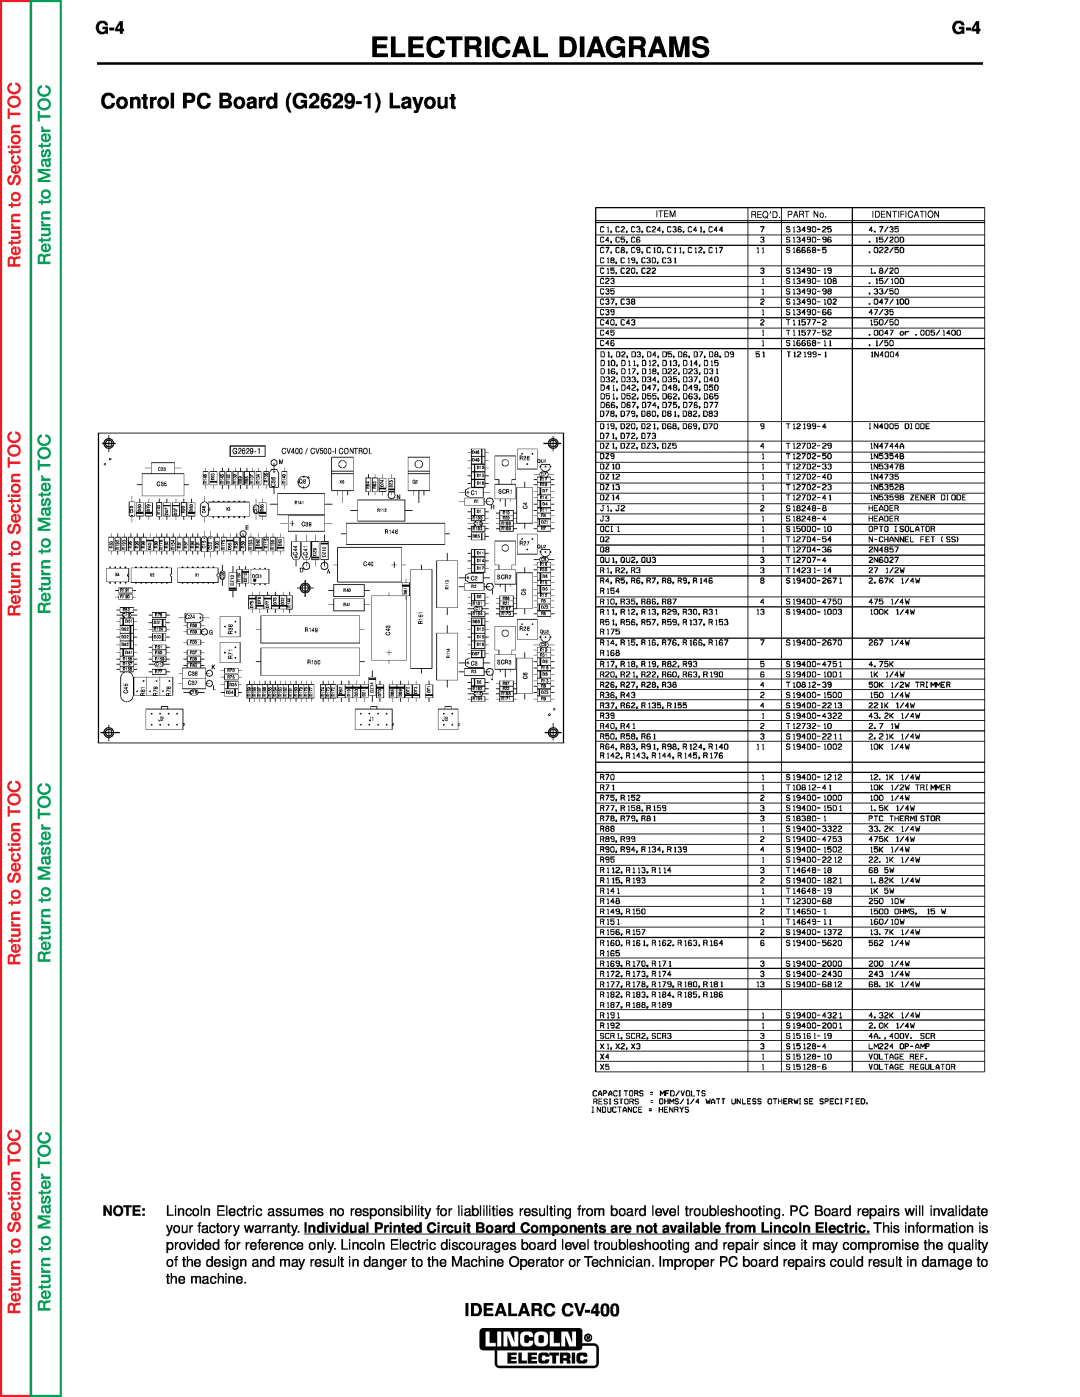 Lincoln Electric SVM136-A service manual Control PC Board G2629-1 Layout, Electrical Diagrams, Return to Section TOC 